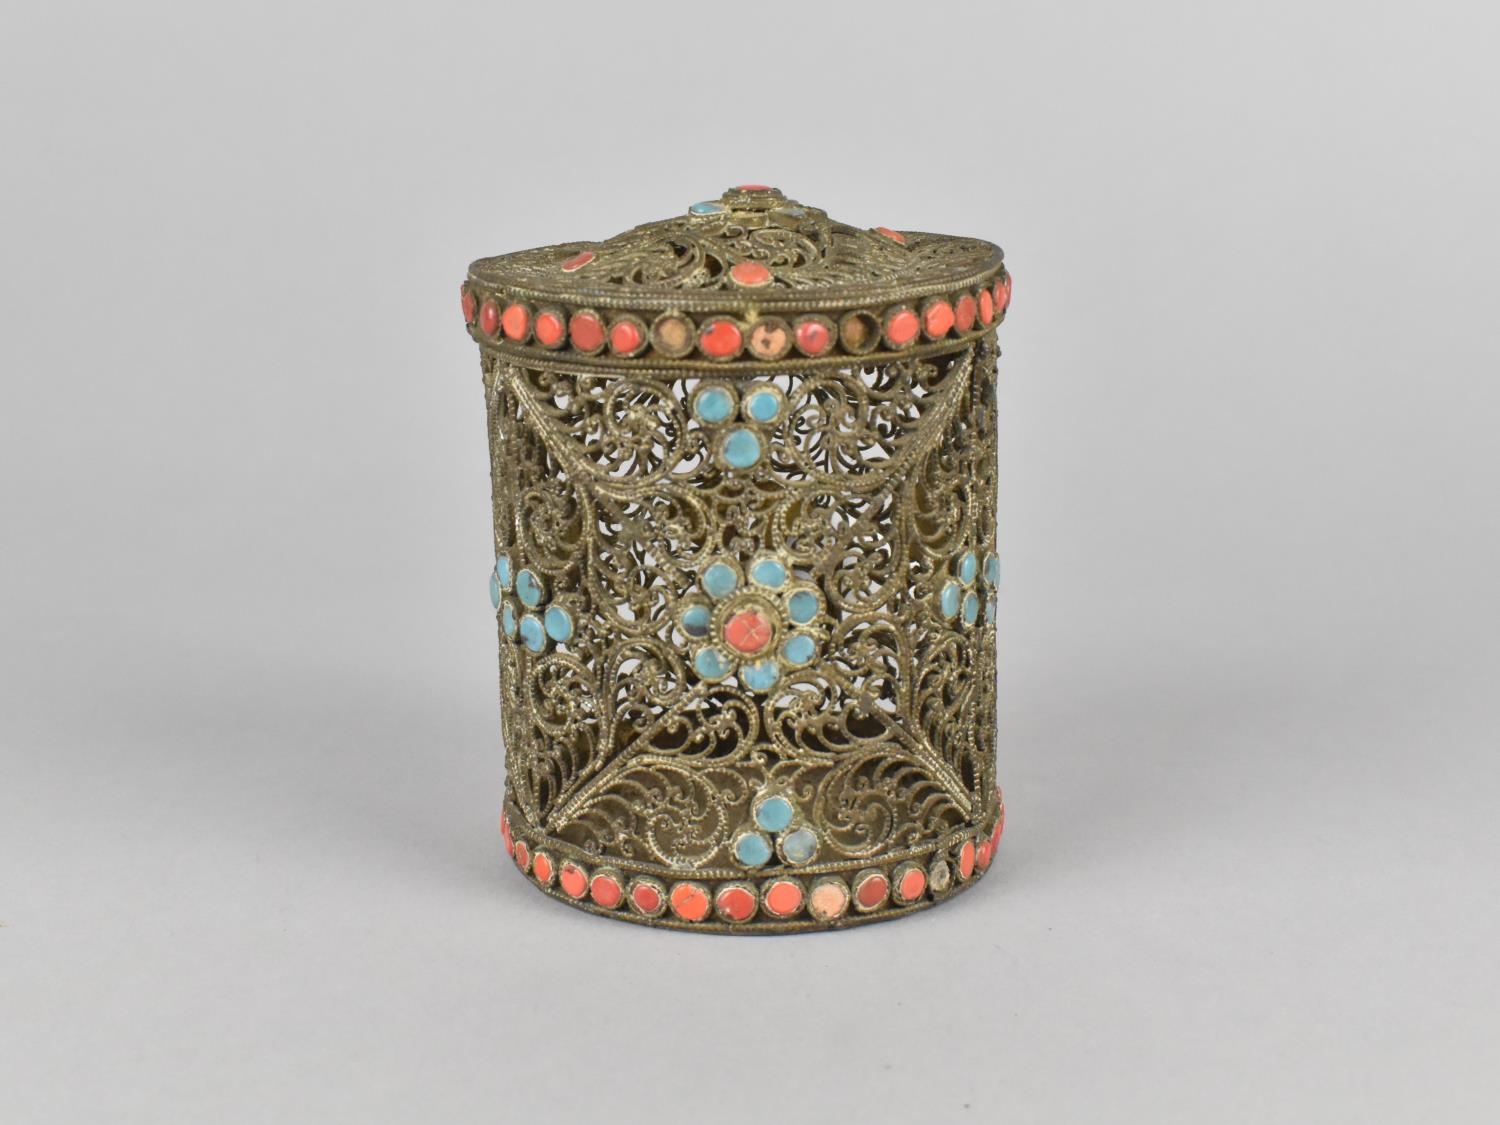 A Late 19th Century White Metal Cylindrical Filigree Box with Turquoise and Coral Cabochons, 9cms